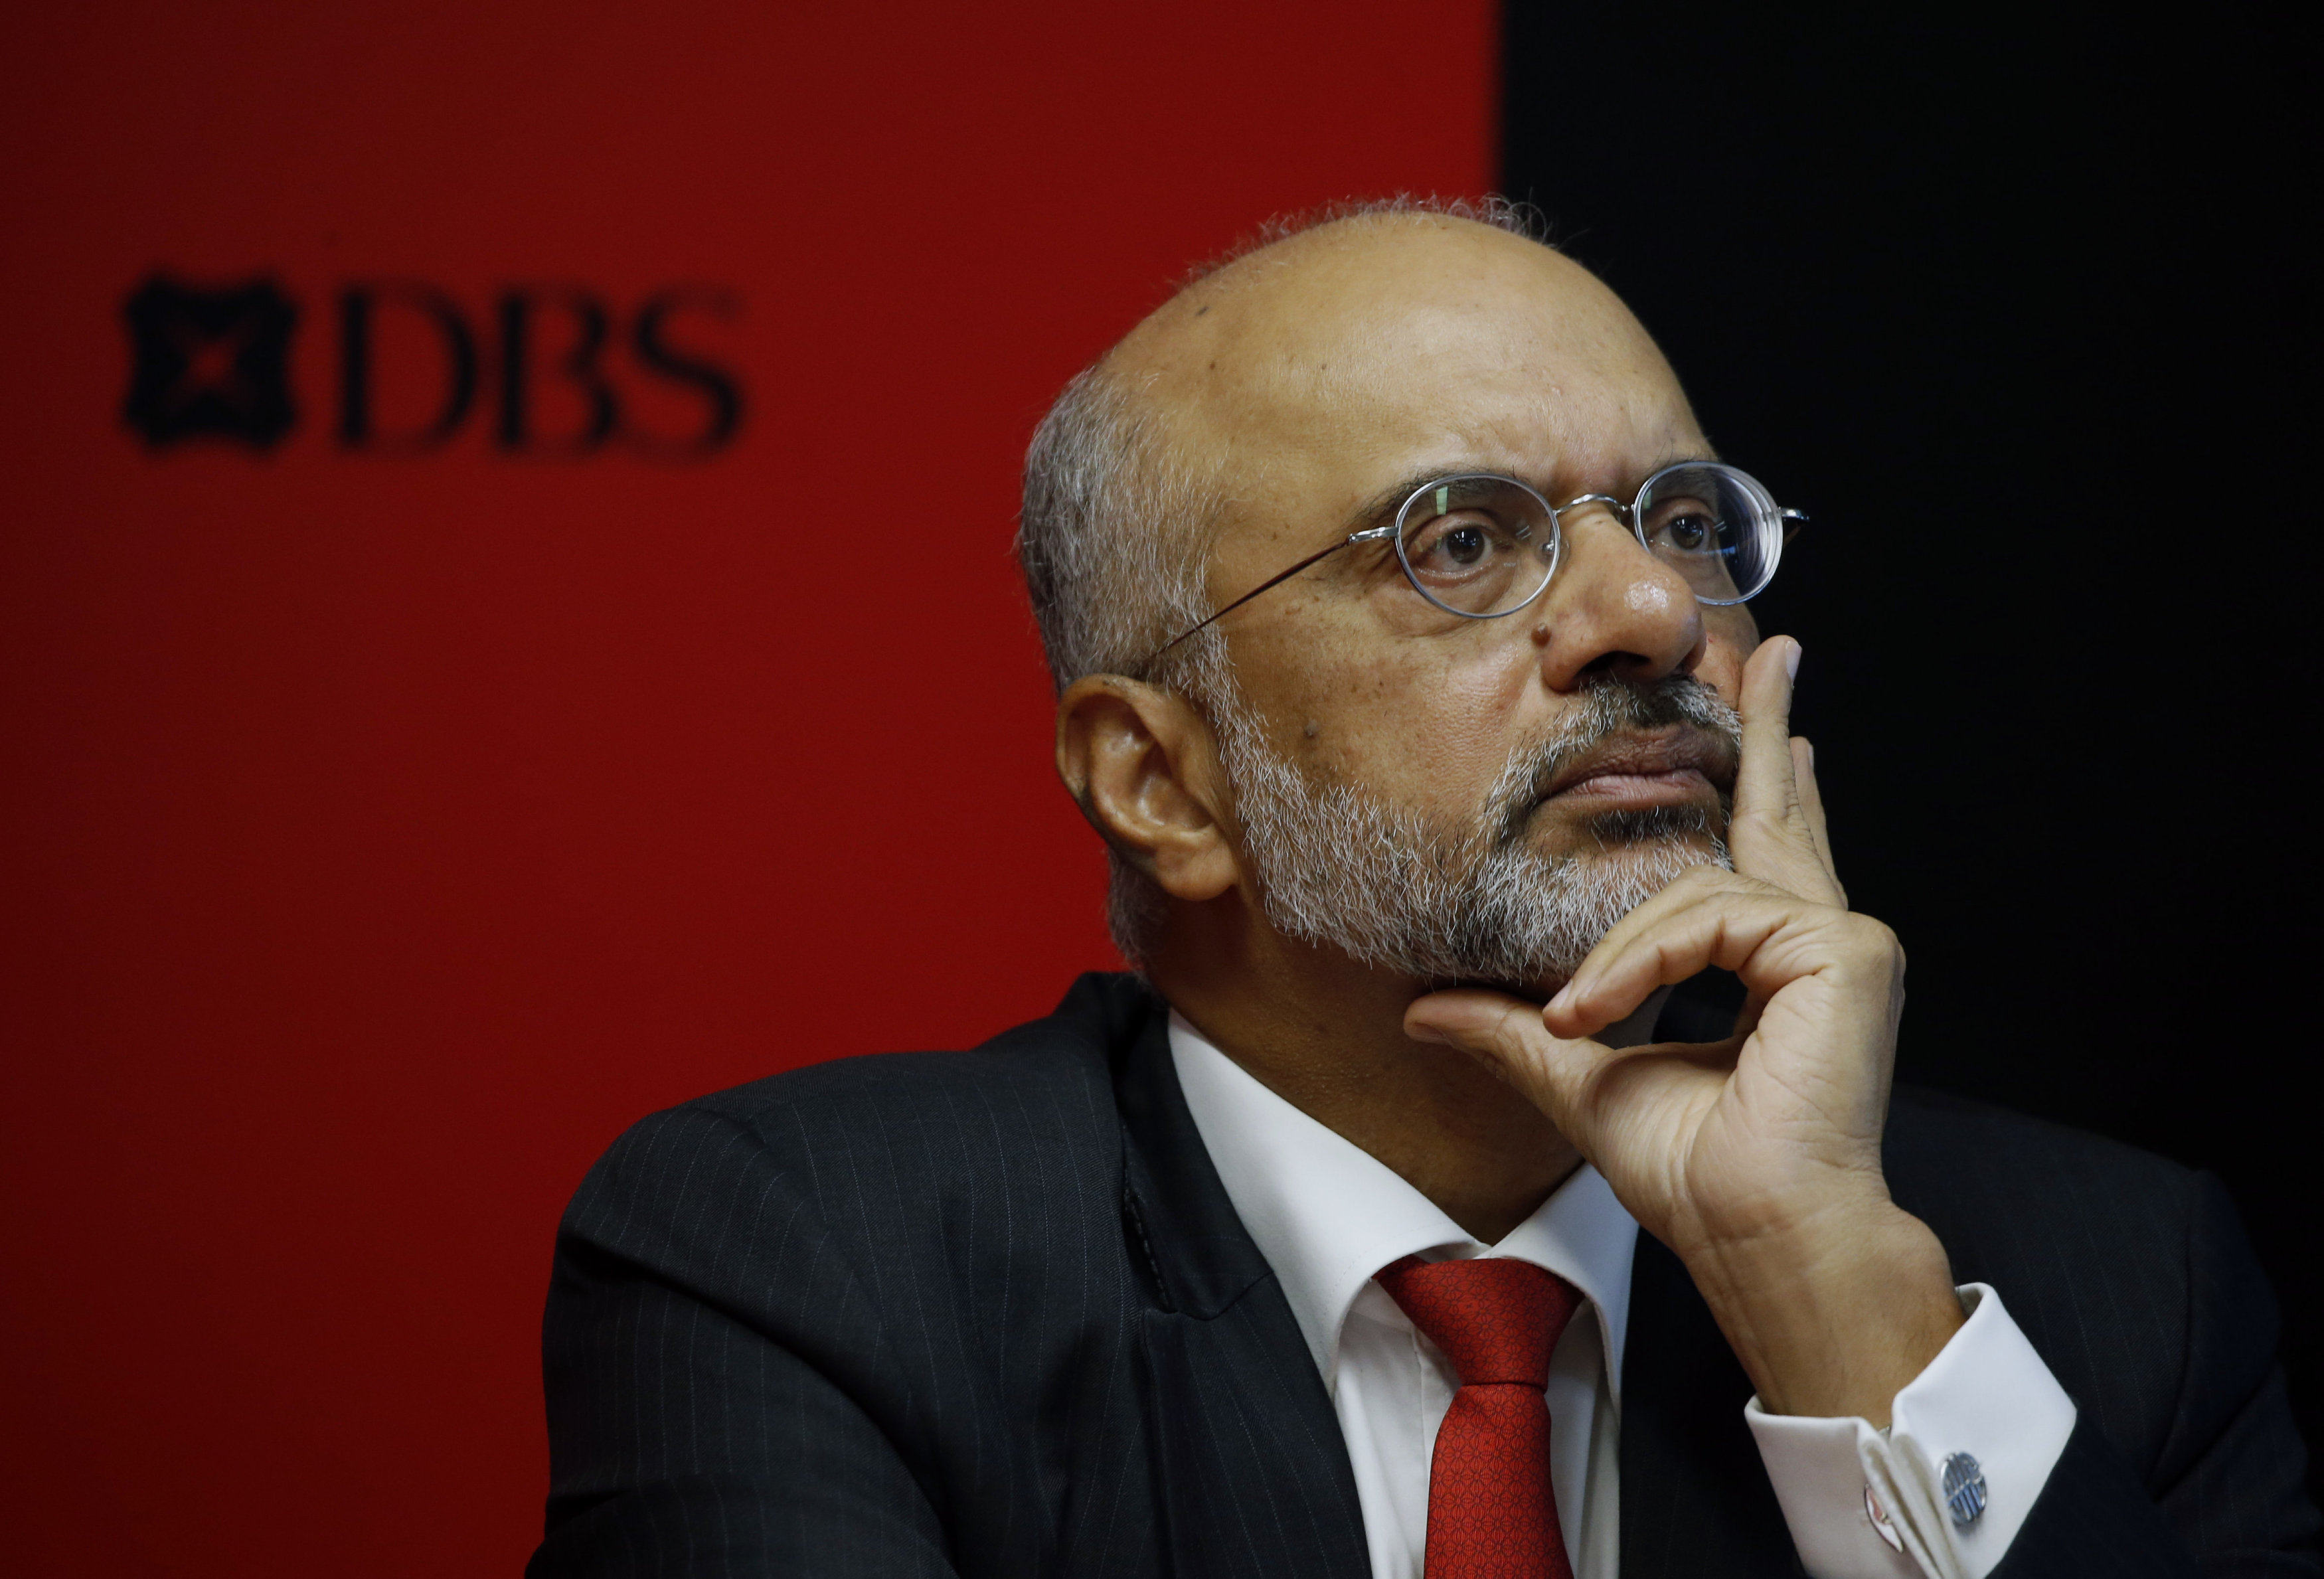 Piyush Gupta has been the head of DBS for 13 years, but many observers are wondering who will replace the 63-year-old once he decides to step down. Photo: Reuters